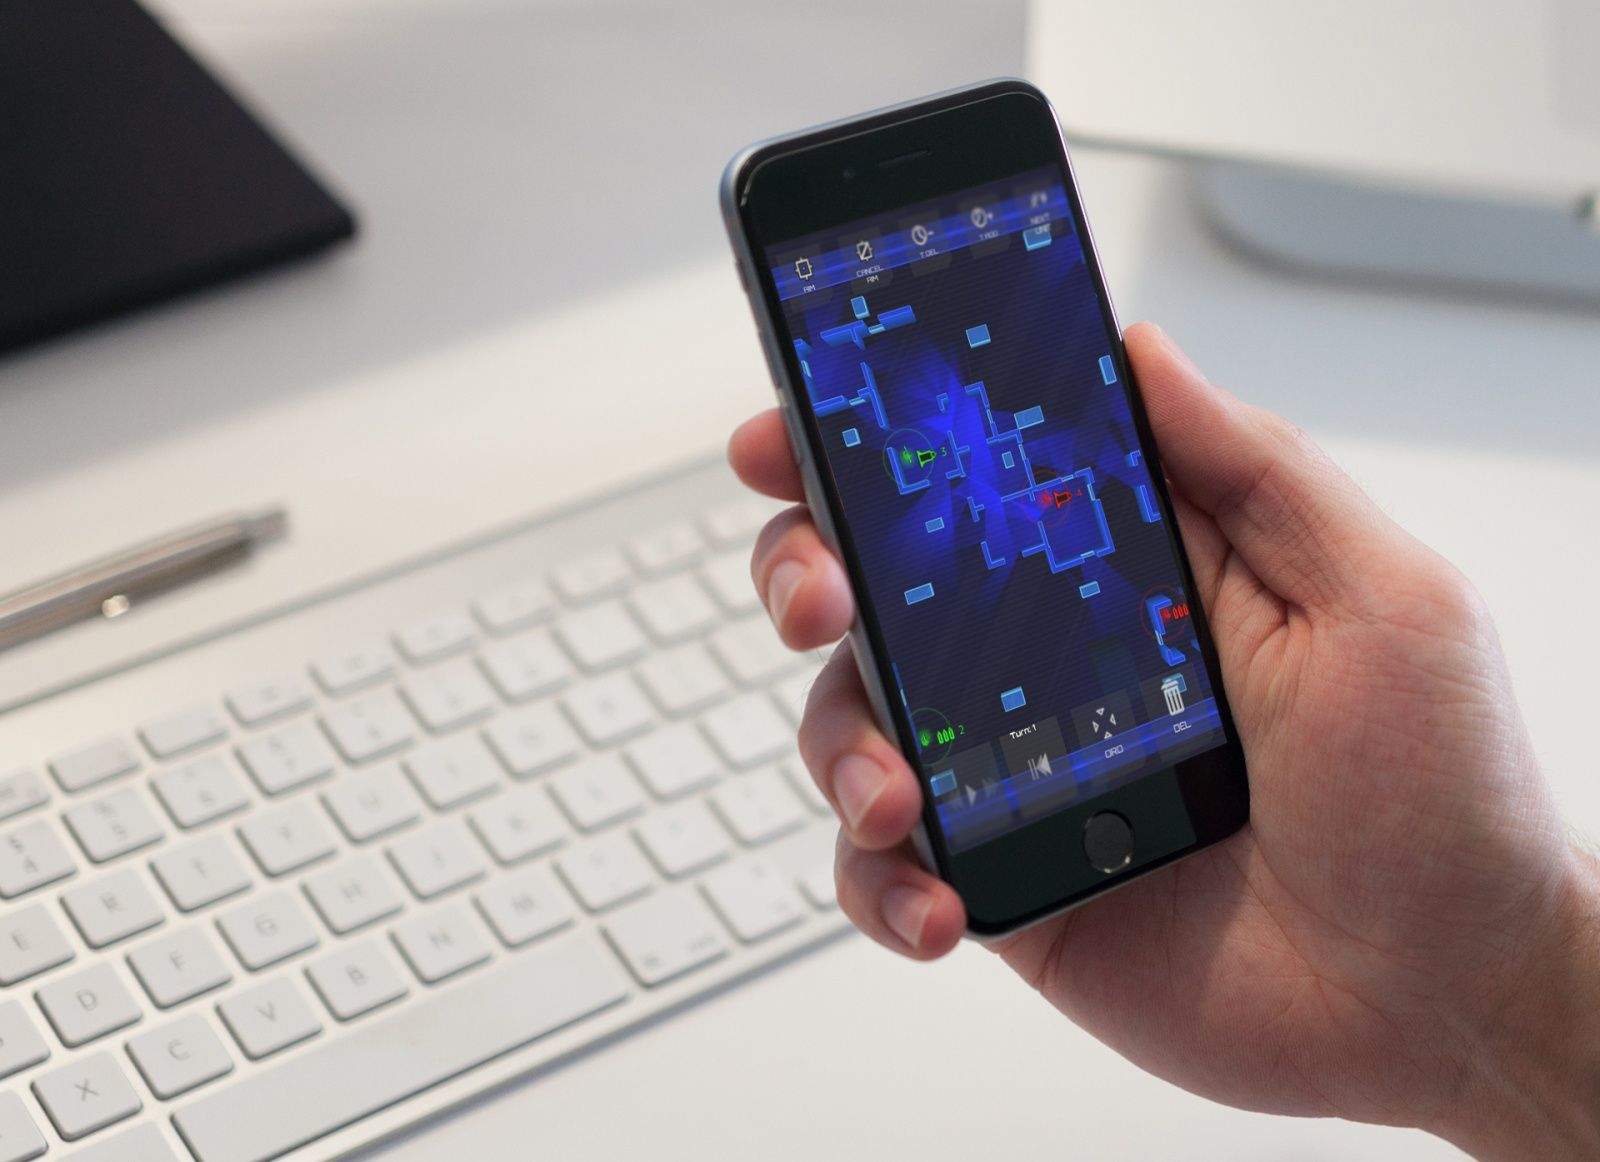 You'll want to take a break from work with these amazing iOS games. Photo: Stephen Smith